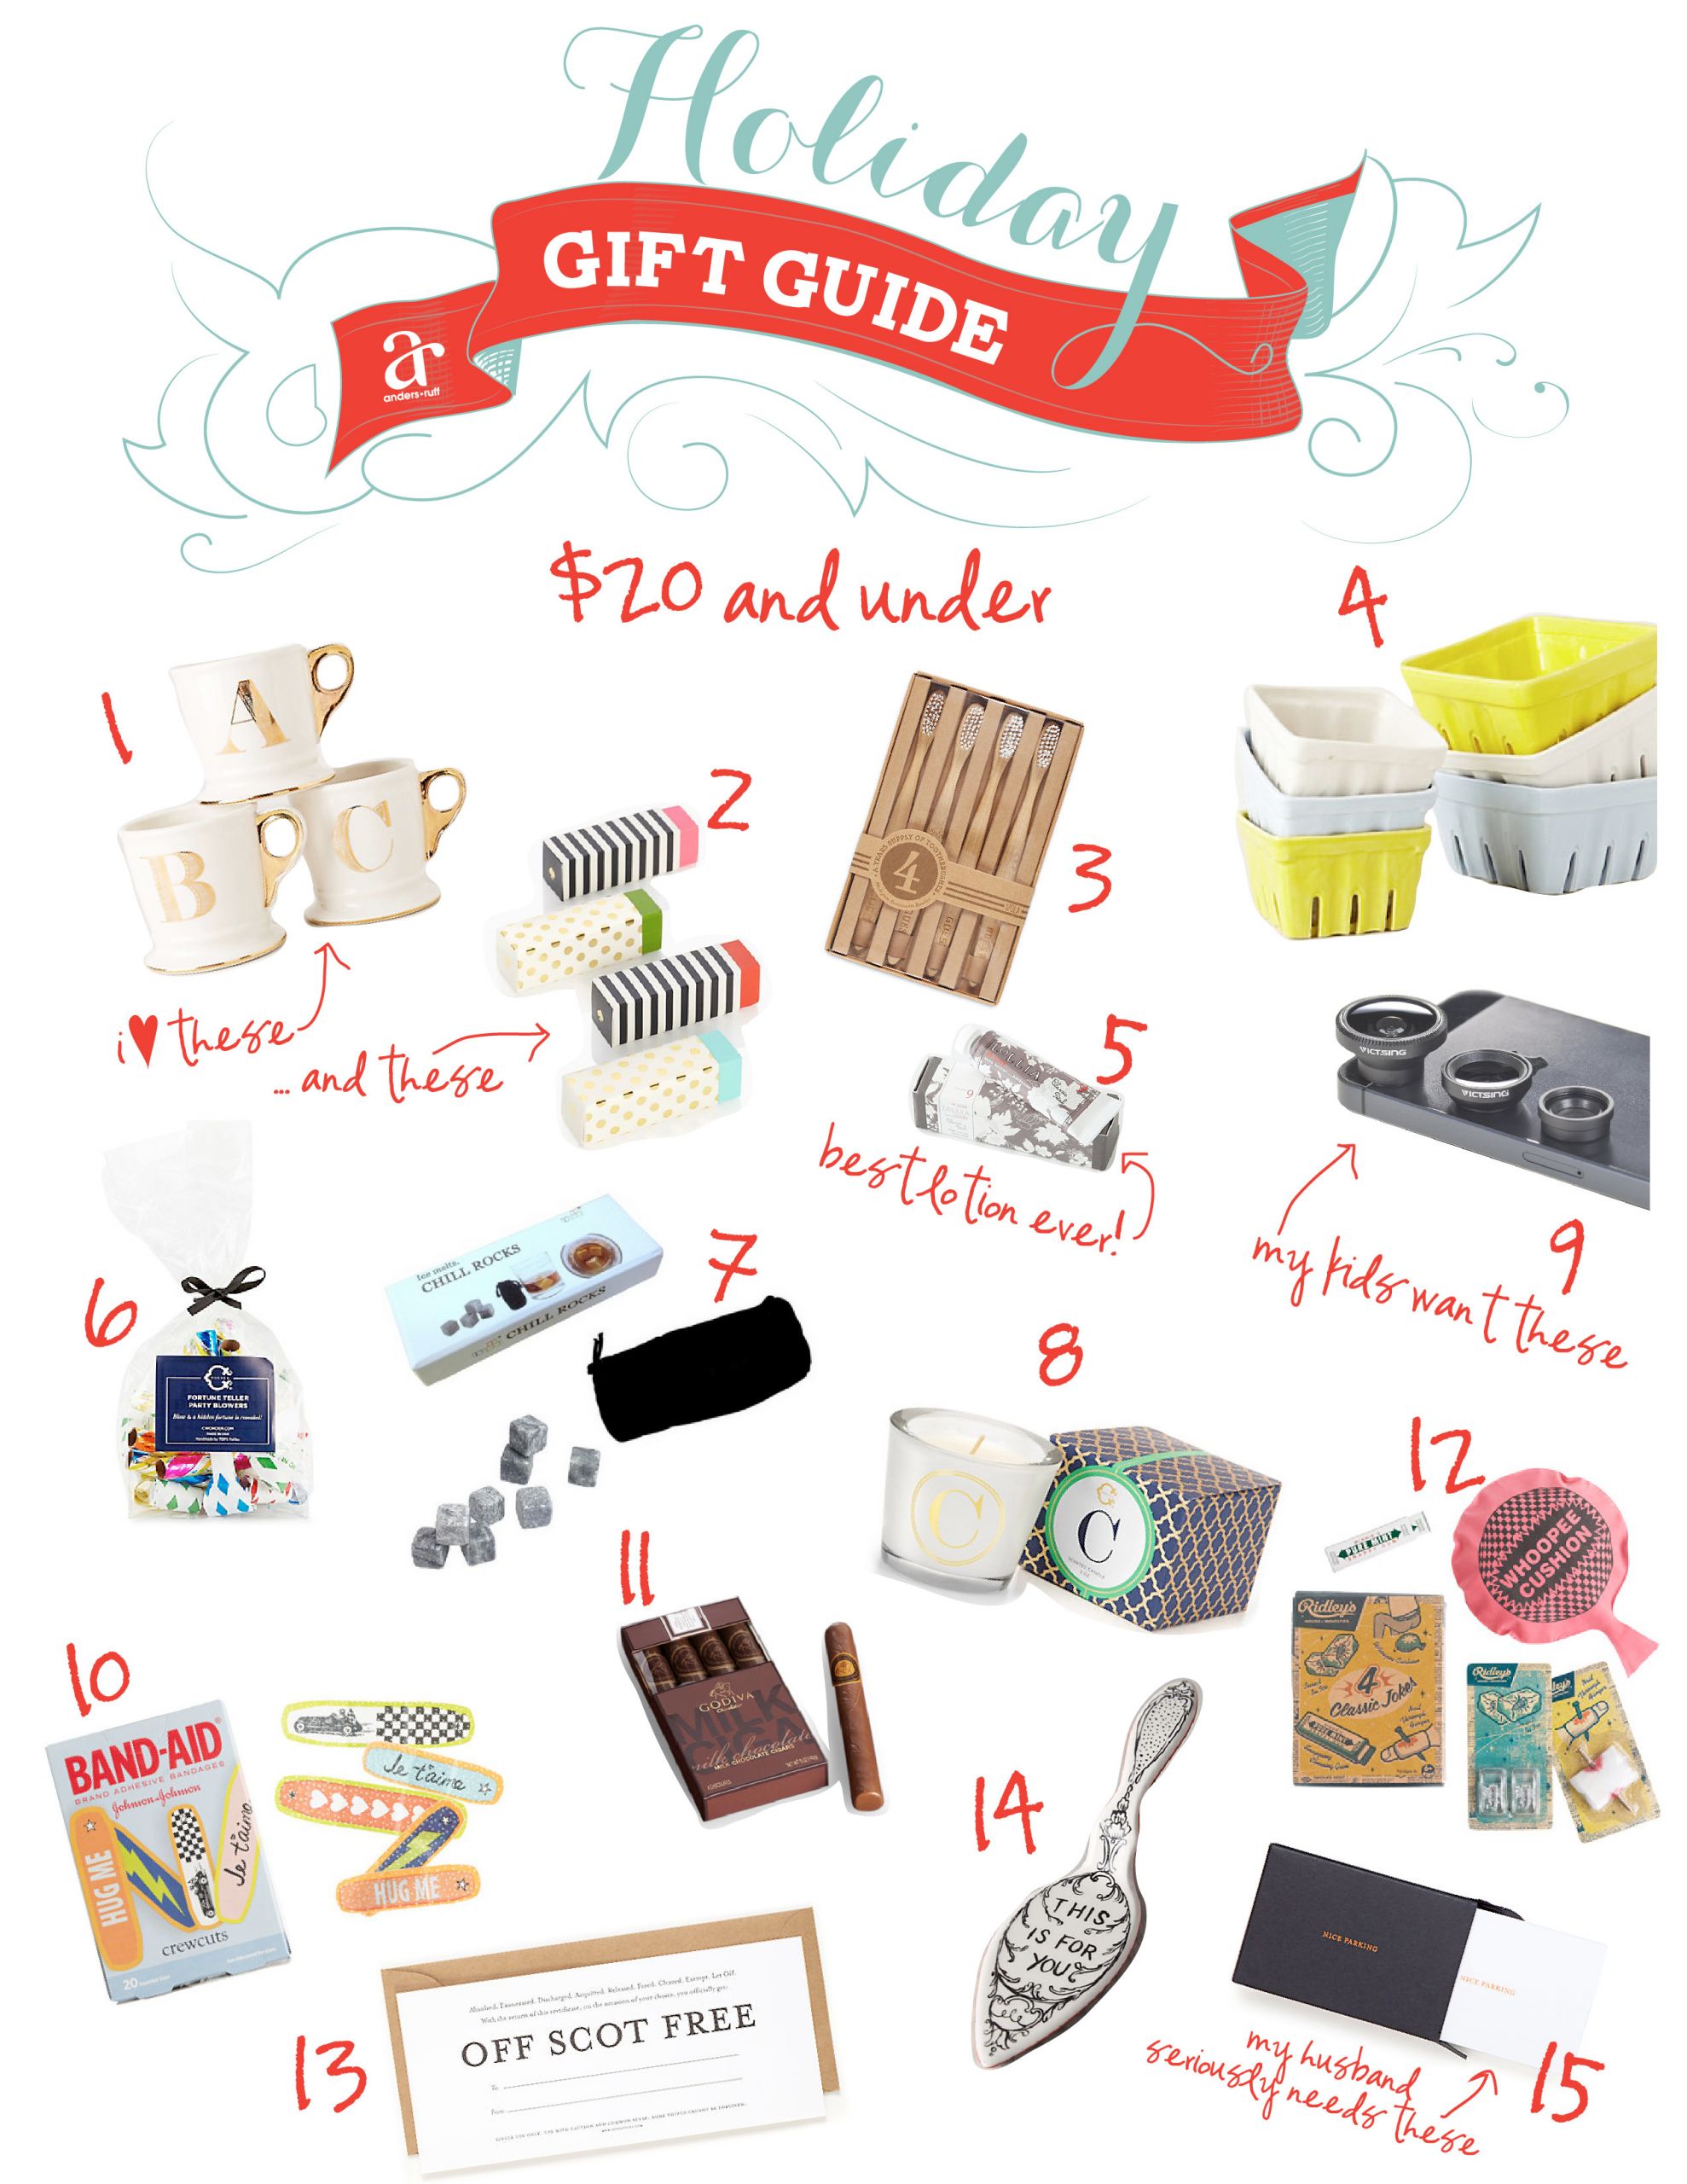 Office Holiday Gift Ideas Under 20
 fice Gift Exchange Ideas $20